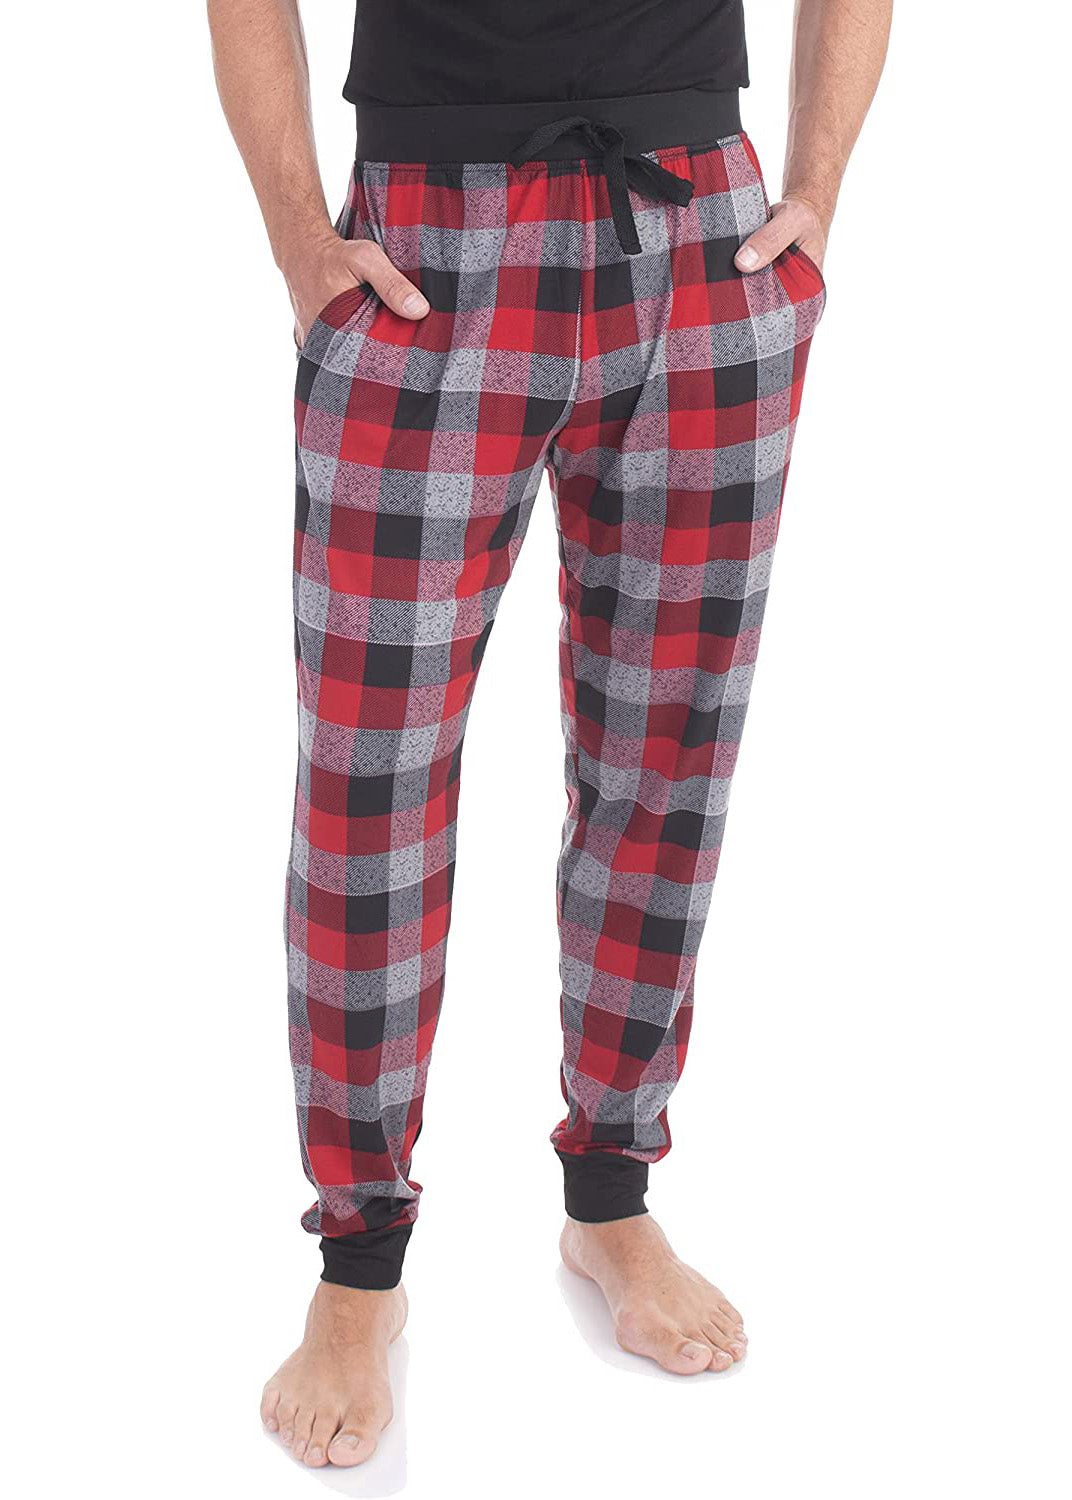 PJ joggers with soft velvety texture, stretch, elastic waistband, drawstring, and stylish ankle cuff. This pattern is a red, grey, black tartan. Black cuffs and waist with black drawstring.